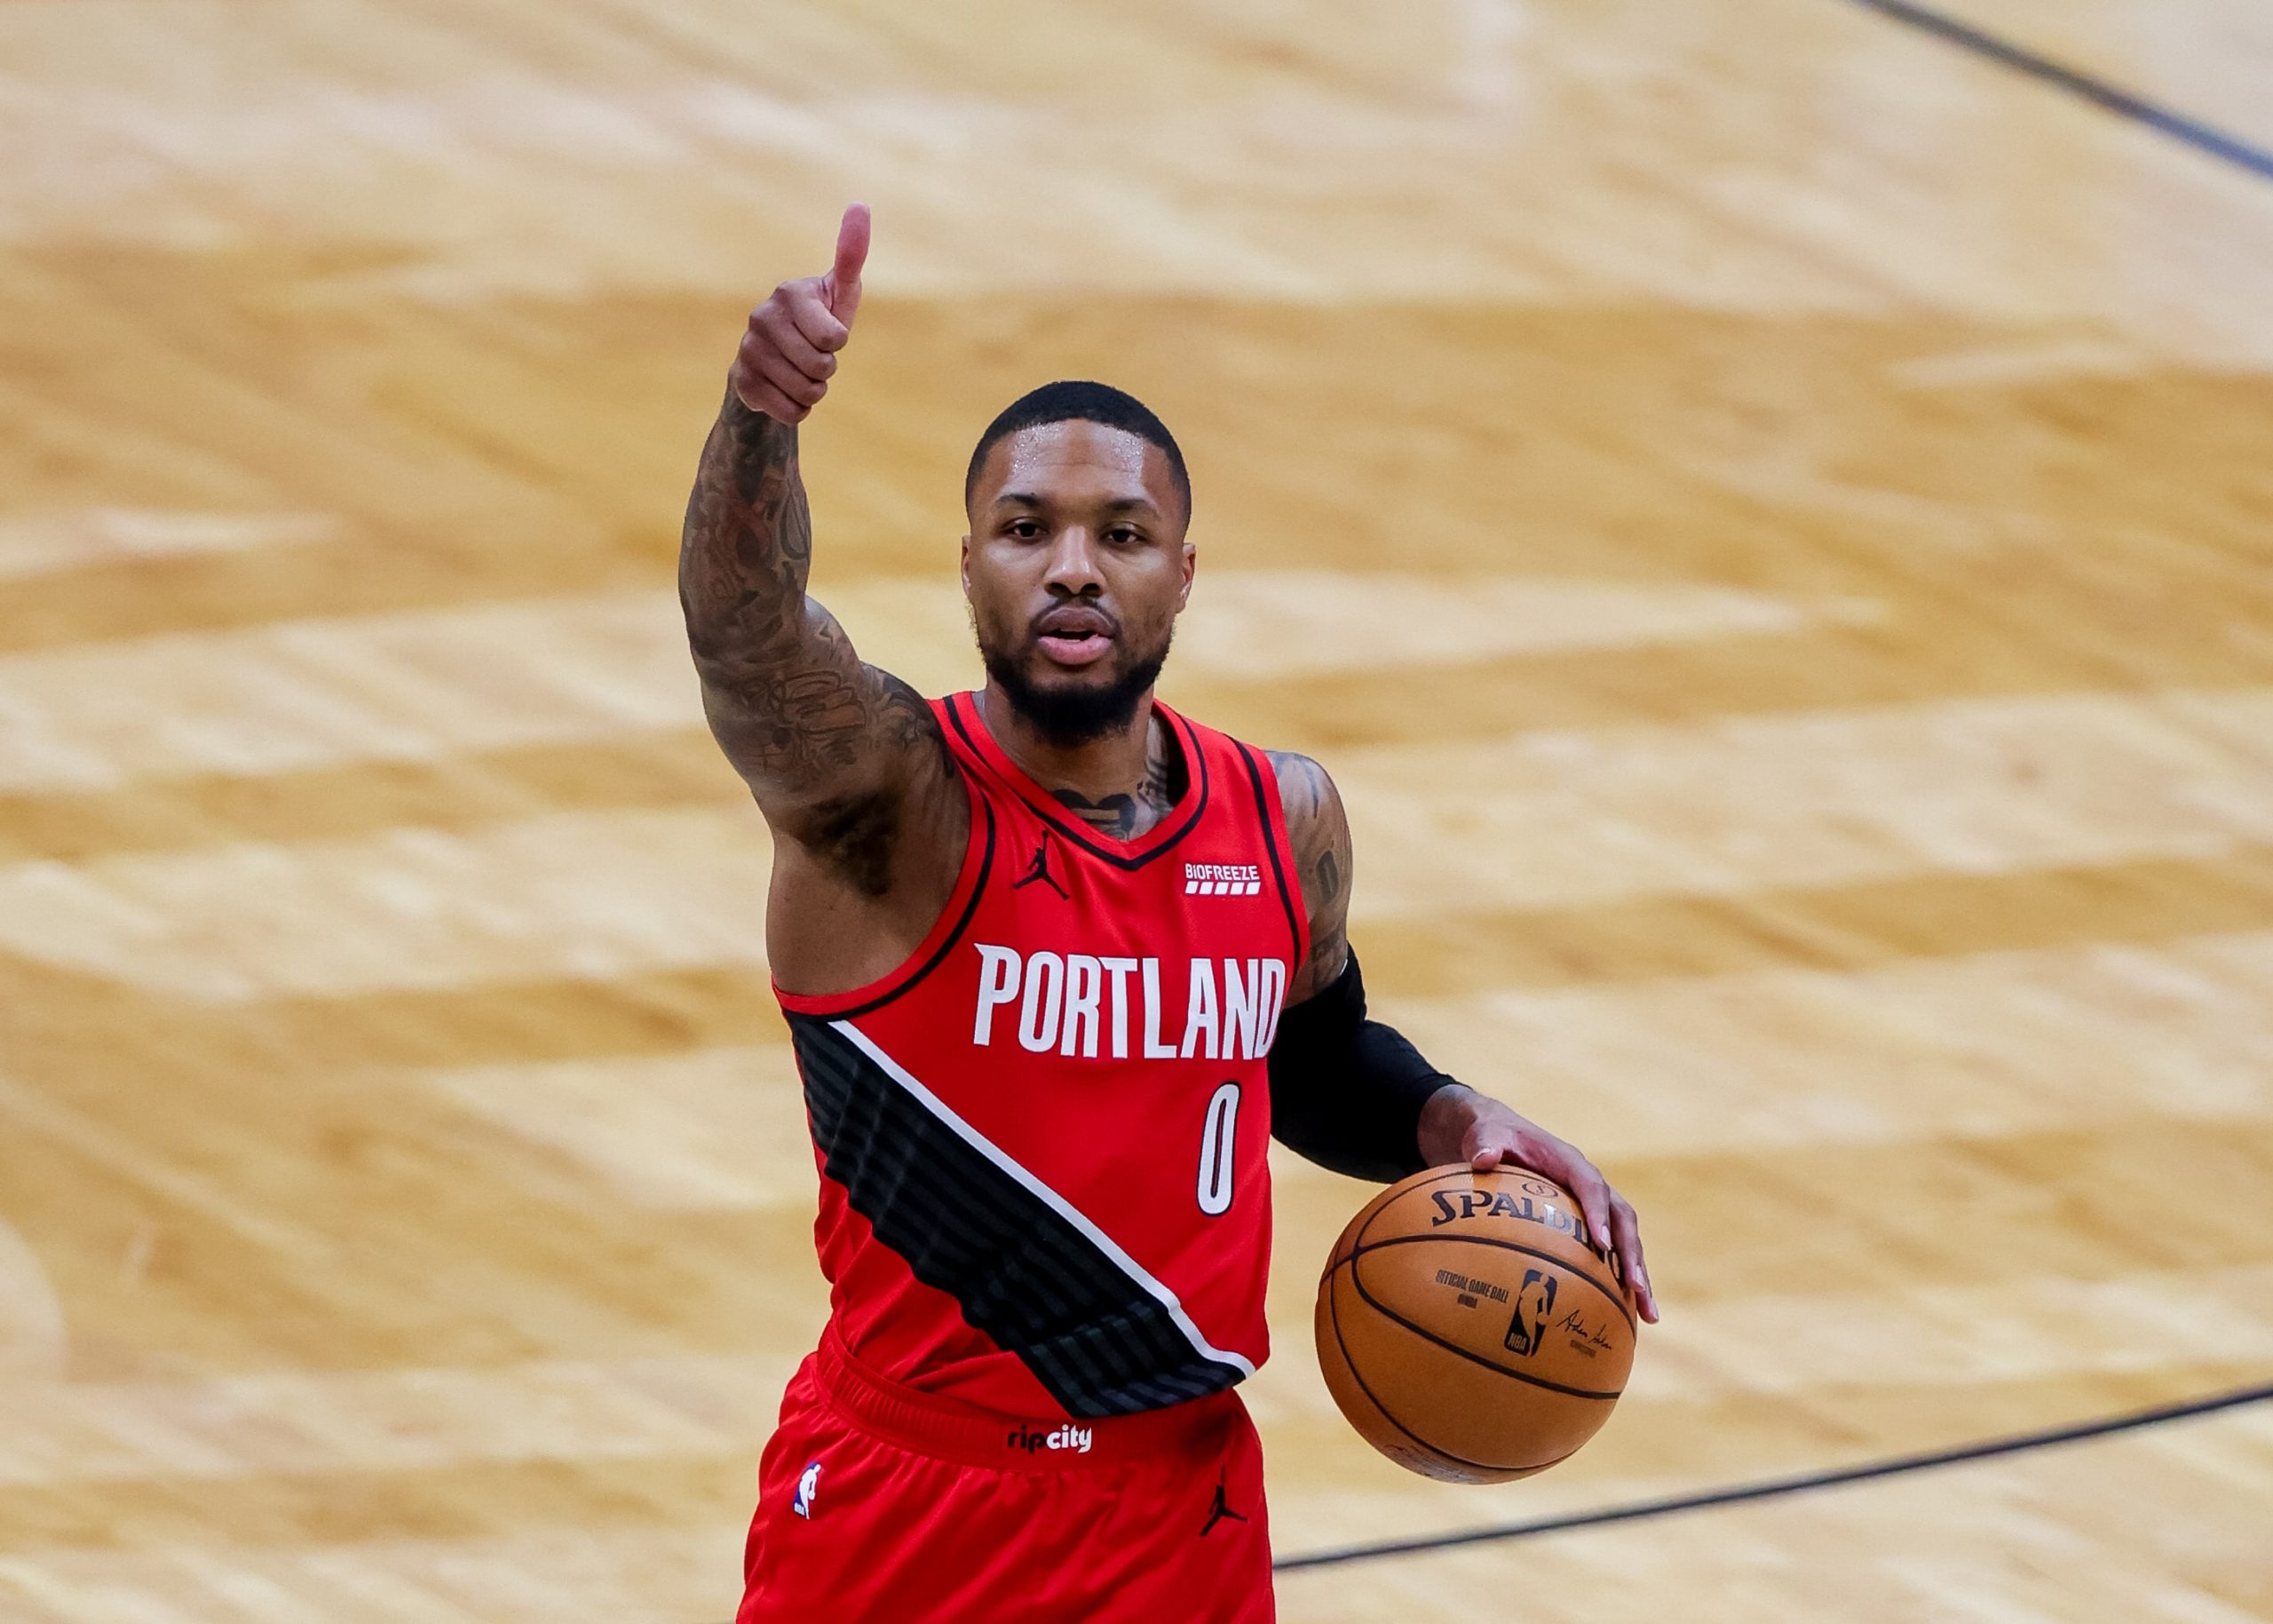 Feb 17, 2021; New Orleans, Louisiana, USA; Portland Trail Blazers guard Damian Lillard (0) calls a play against New Orleans Pelicans during the first half at the Smoothie King Center